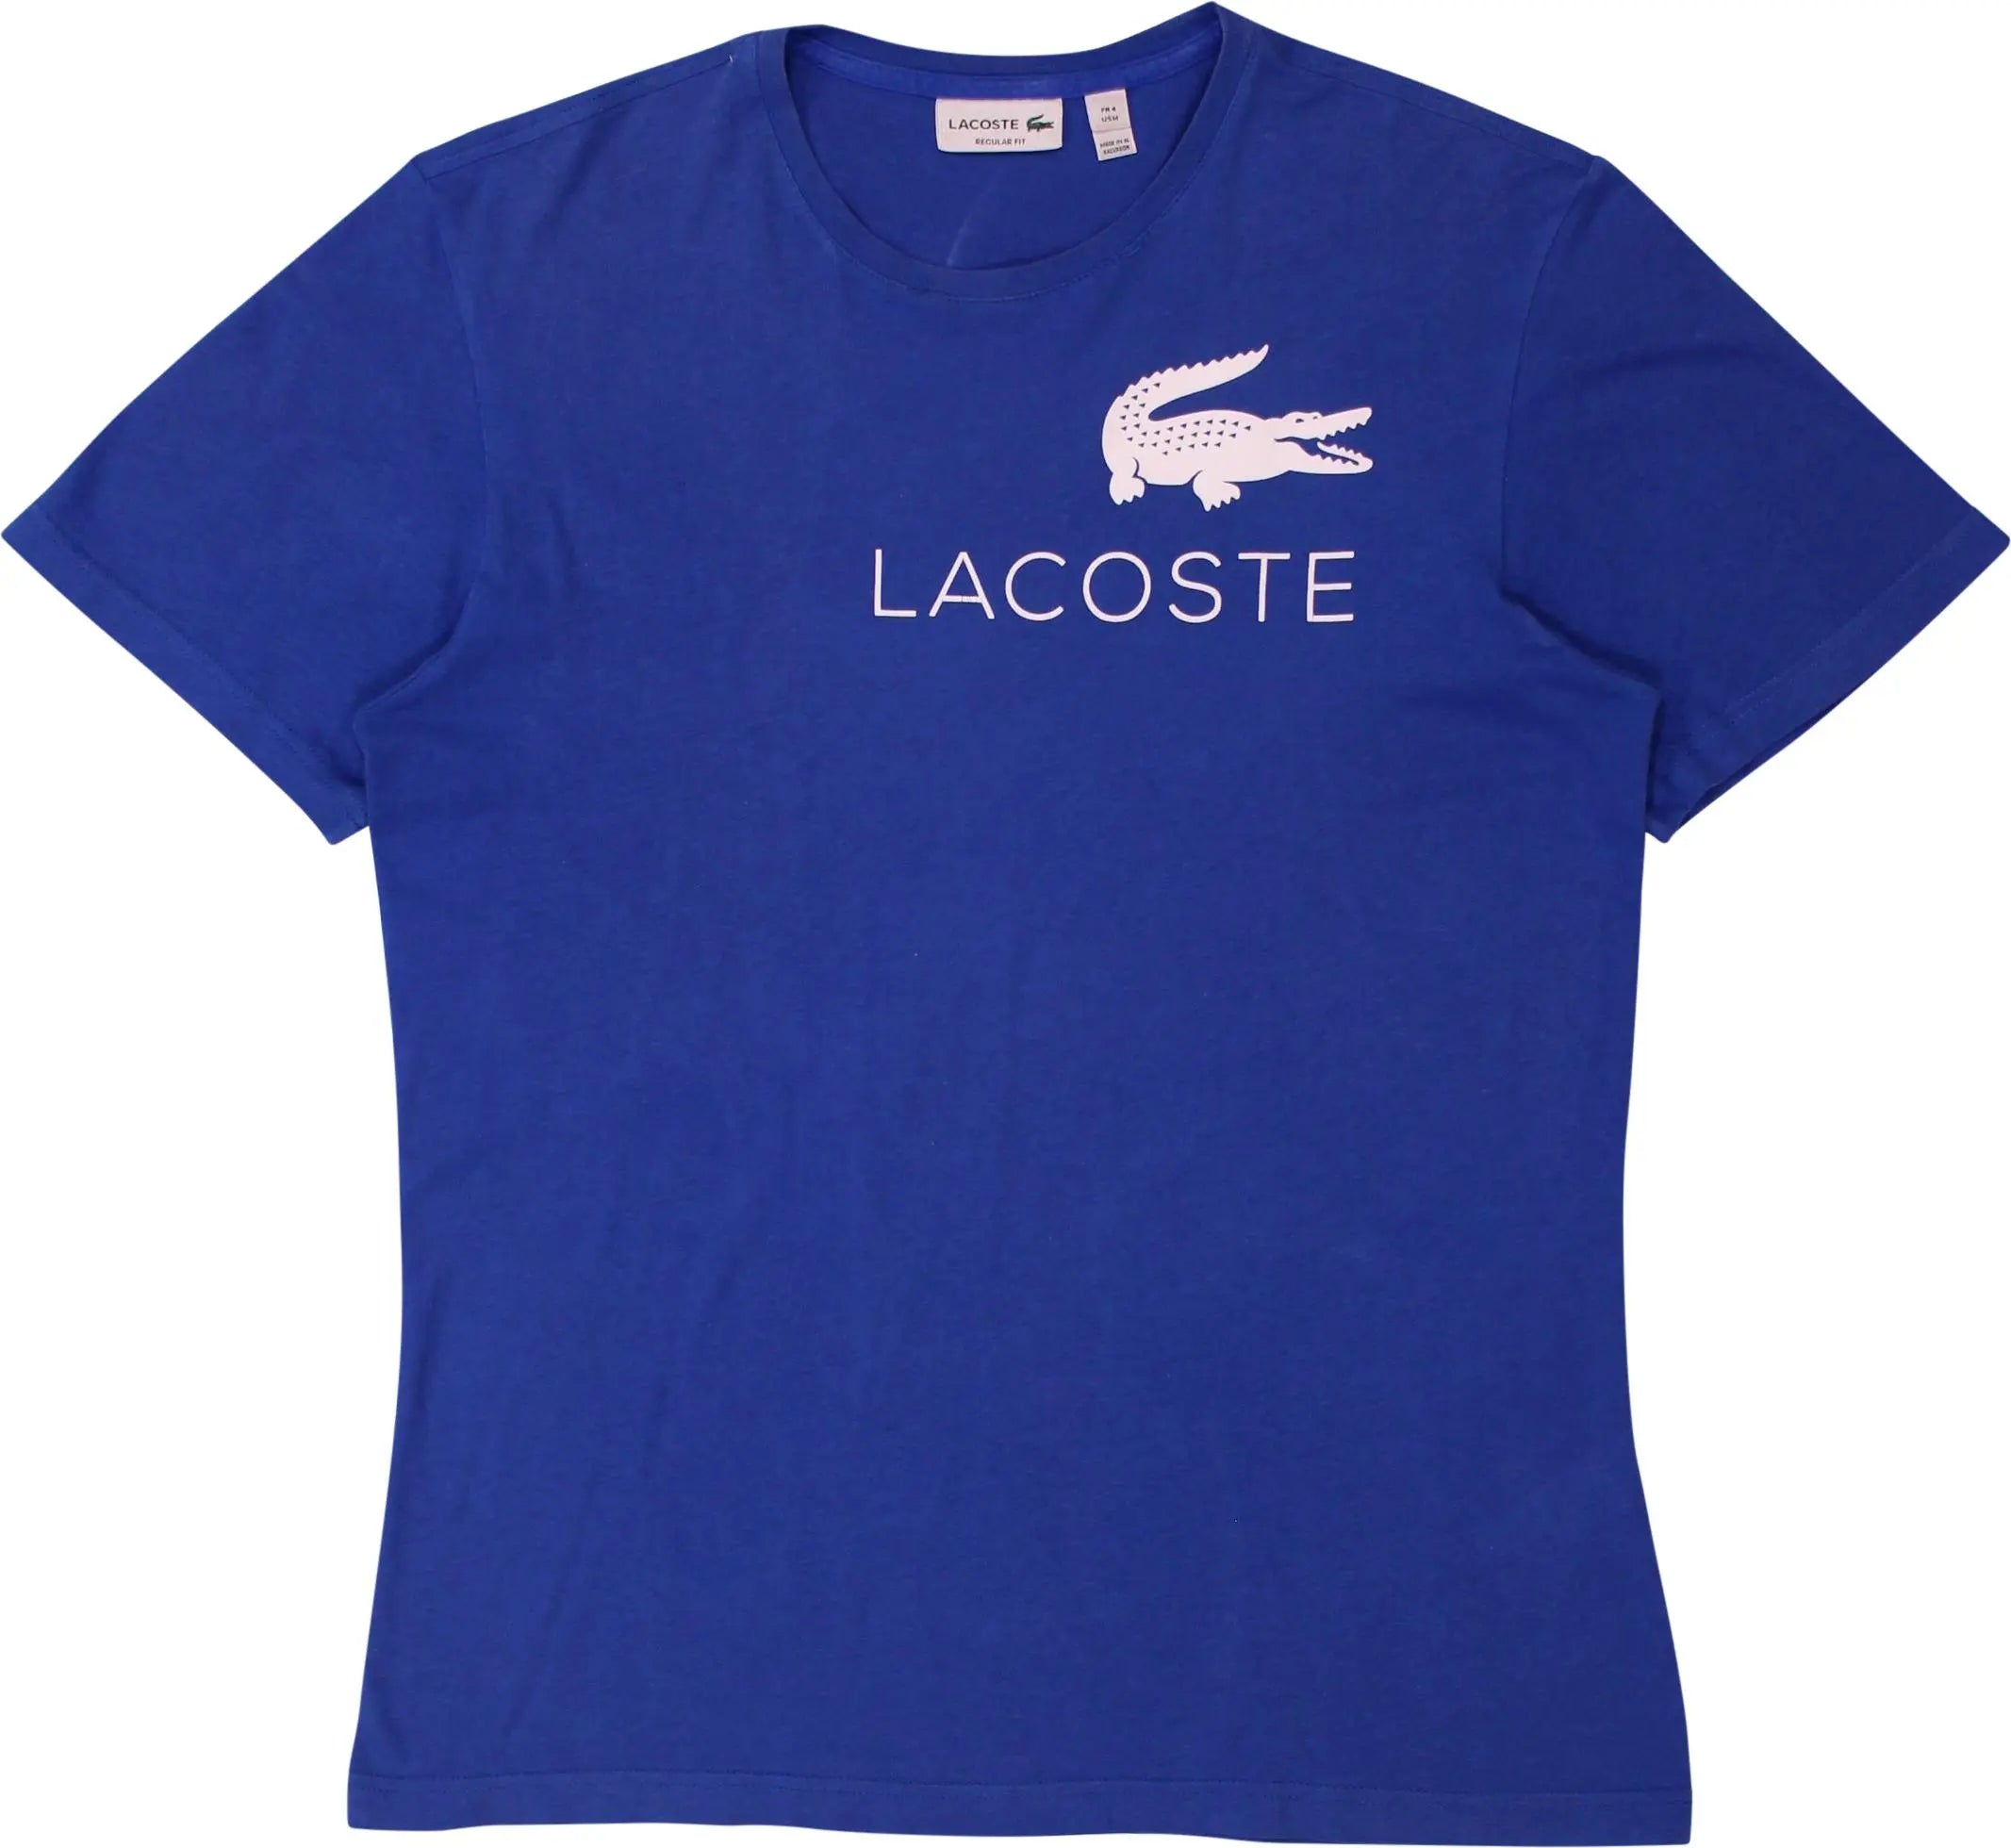 Lacoste - Blue T-shirt by Lacoste- ThriftTale.com - Vintage and second handclothing